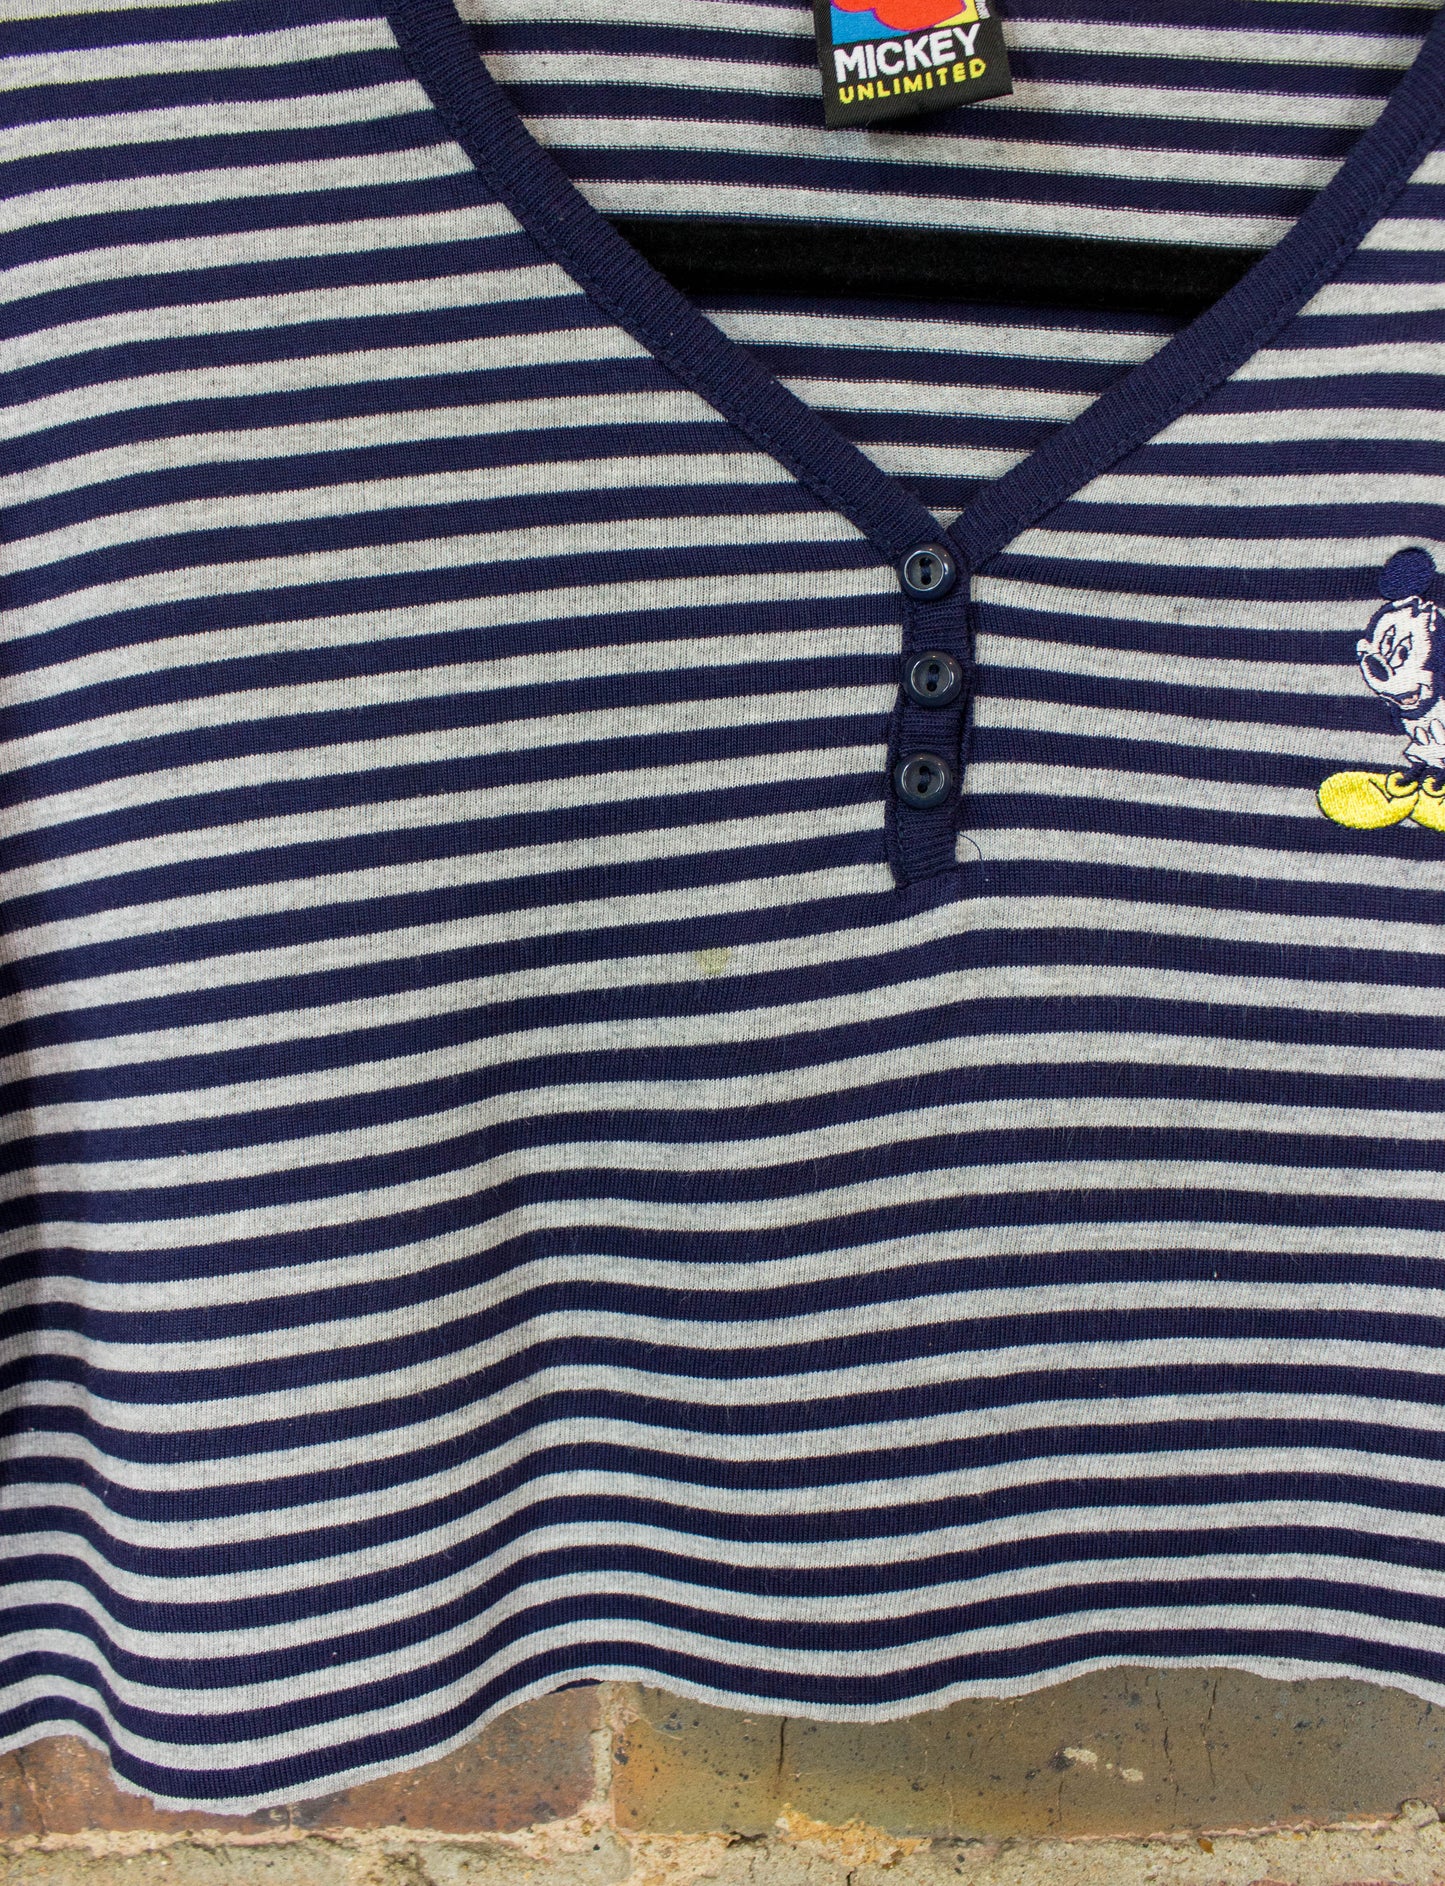 Vintage Mickey Mouse Cropped Graphic T Shirt 90s Navy Blue and Grey Stripes Henley Large